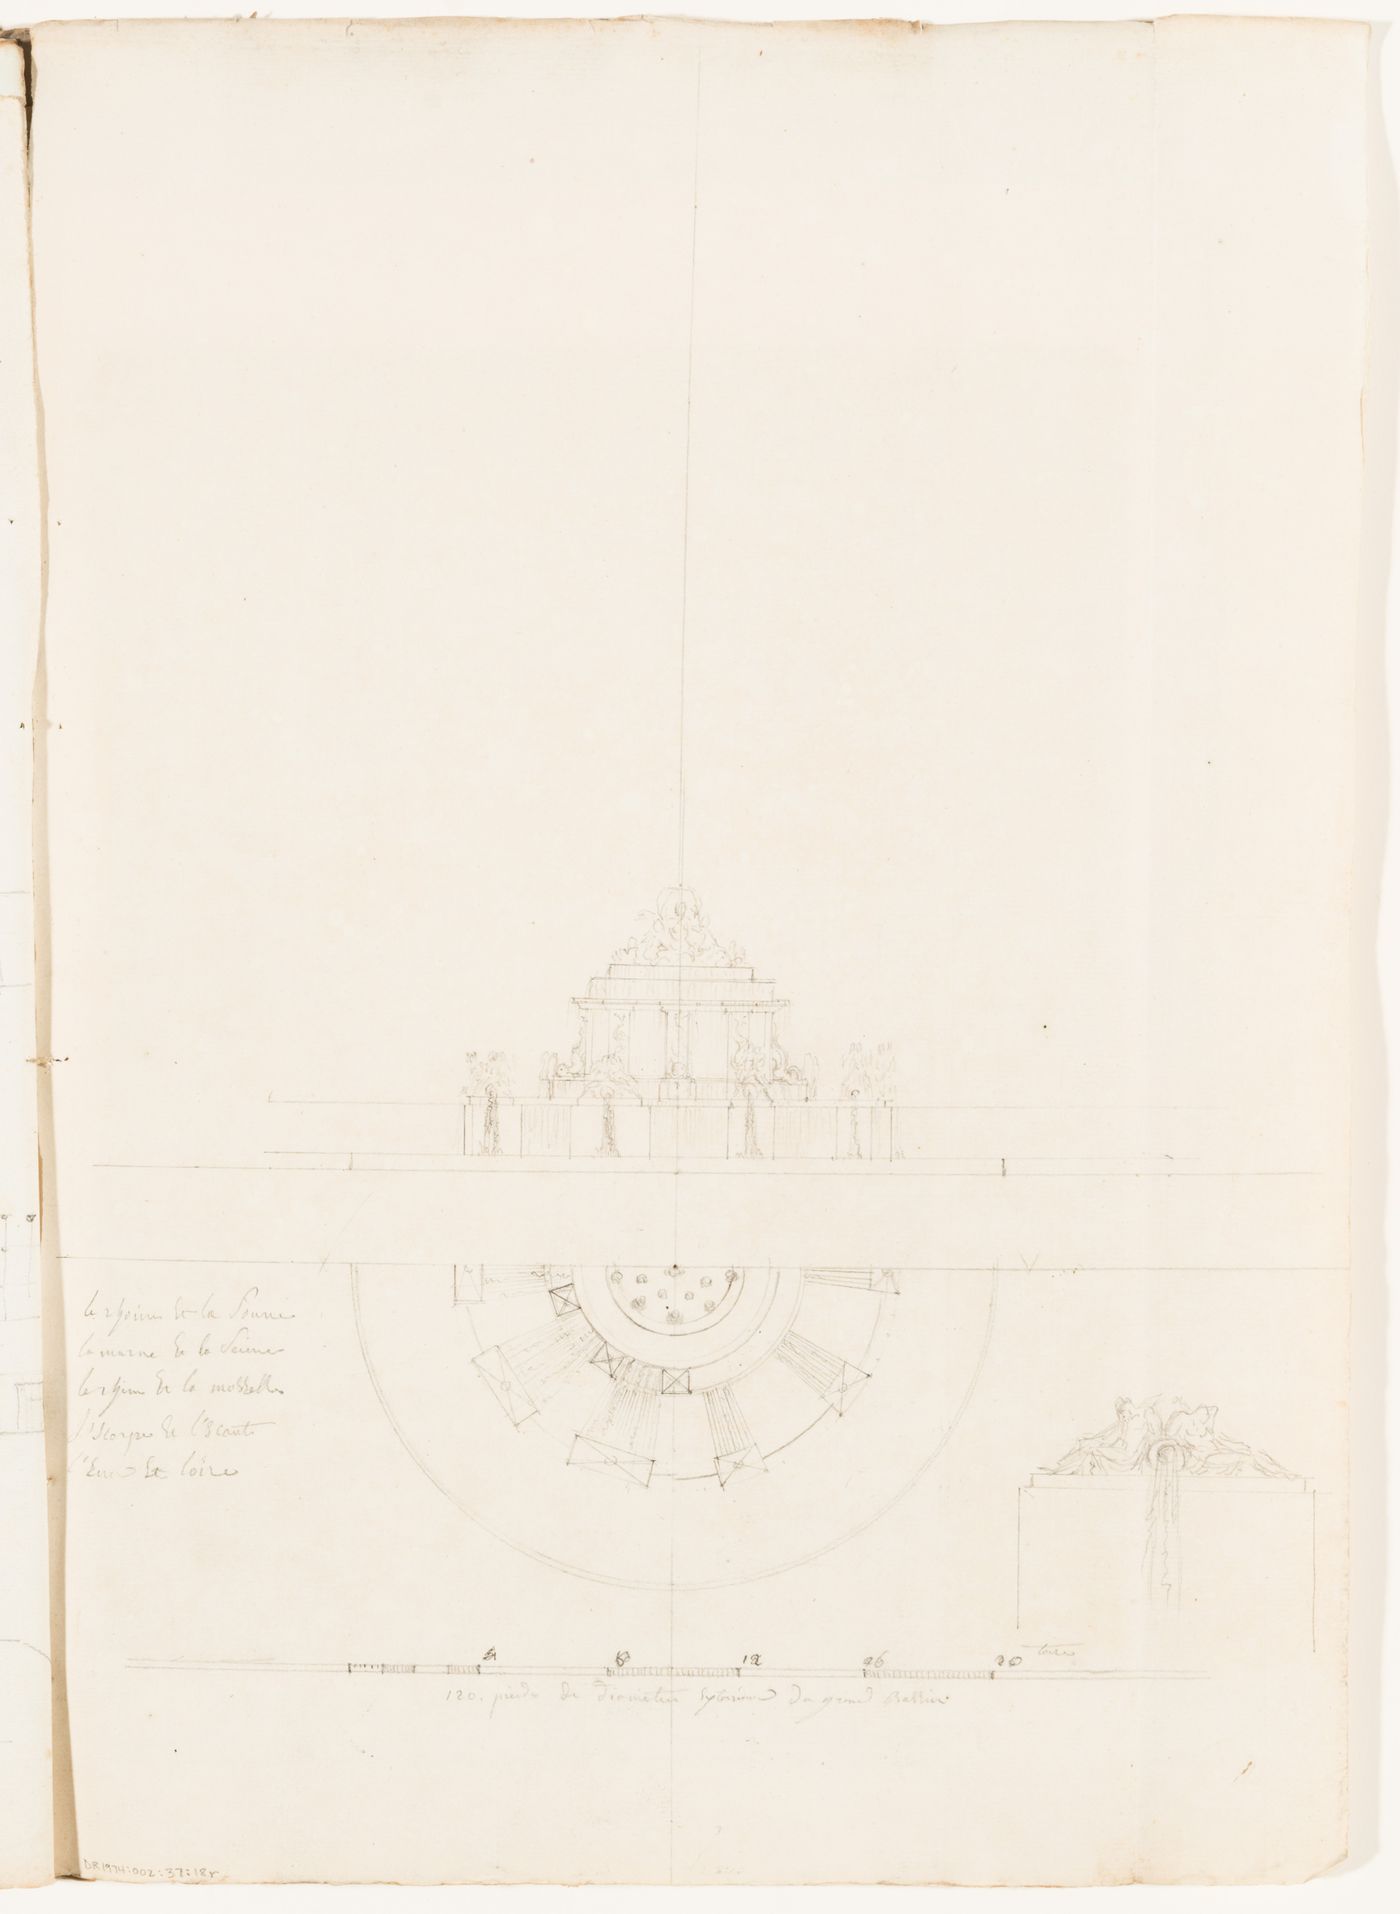 Conceptual sketch elevation and half plan for a two-tiered fountain, including a detail for the sculpture; verso: Sketch plan, possibly for place Louis XV